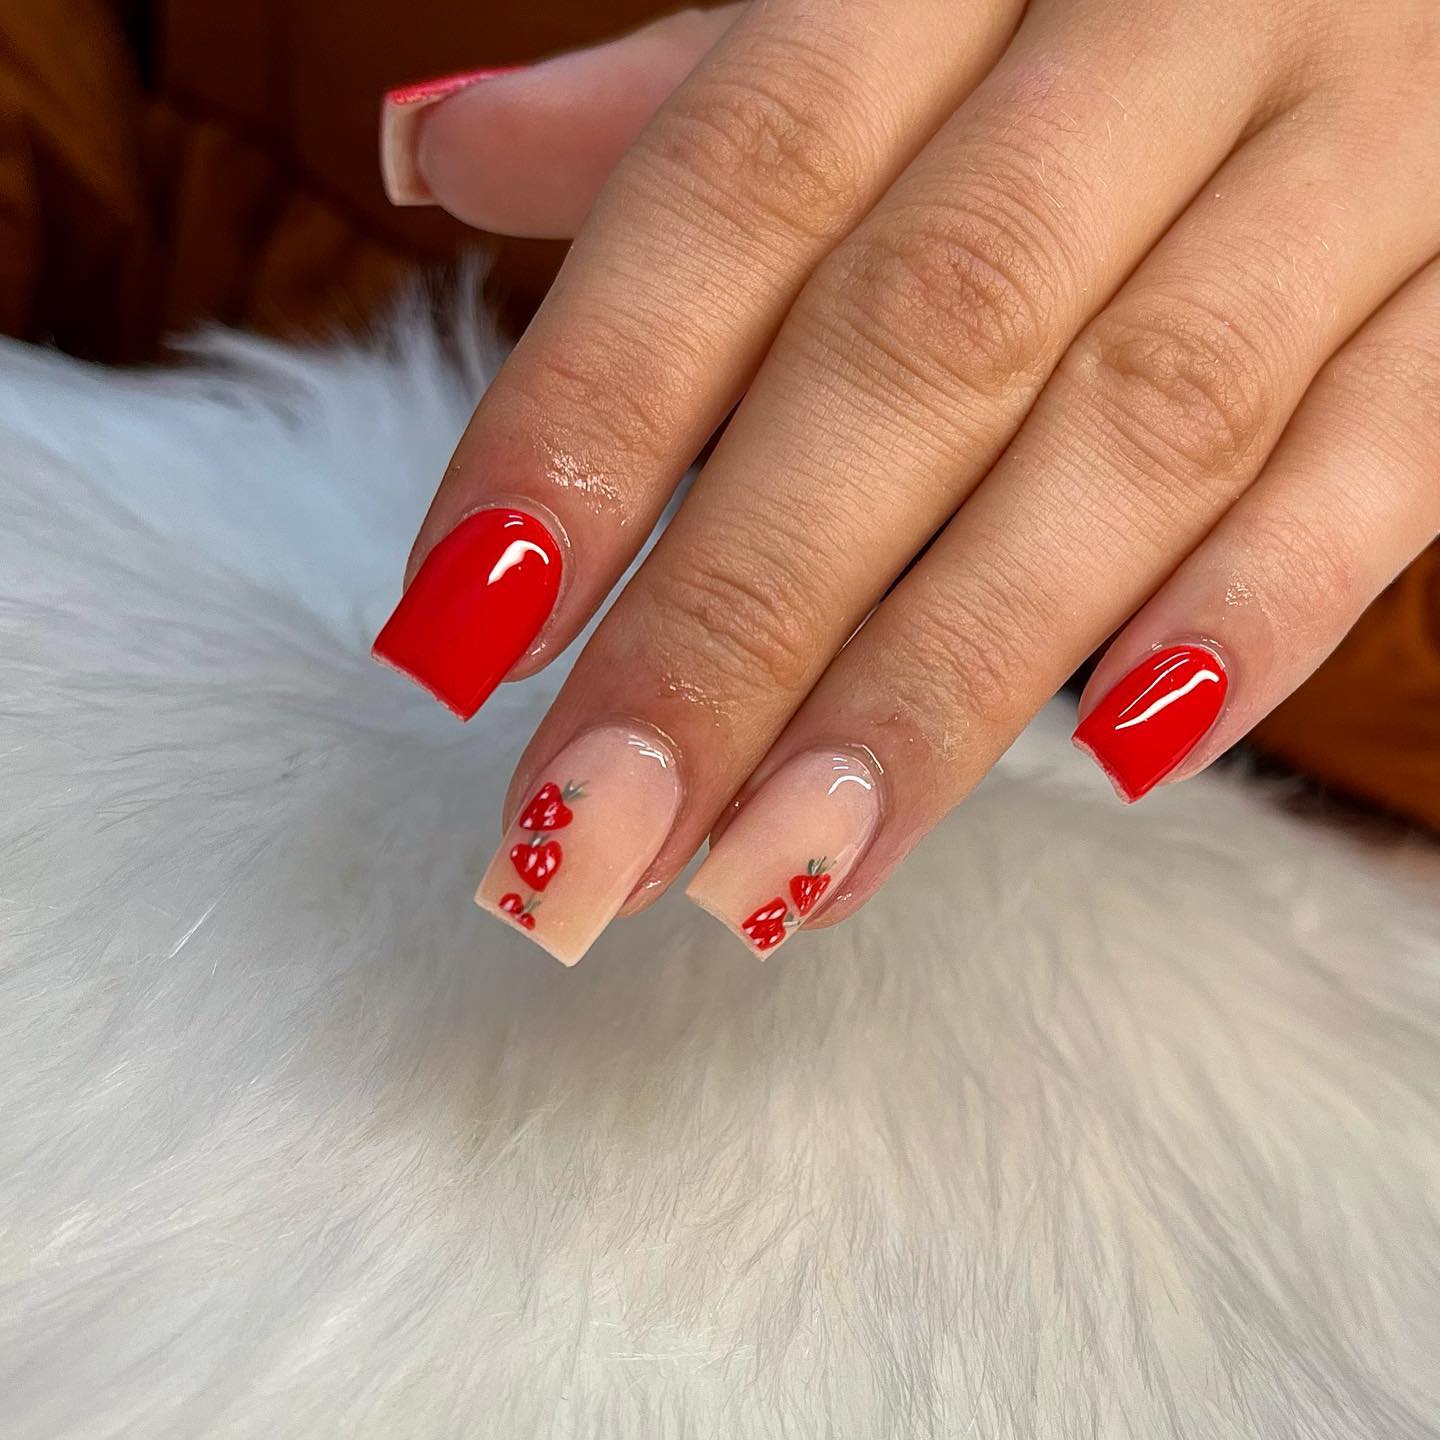 Which fruit comes to your mind when we say red? Strawberry is one of them, for sure. Why not adding little cute strawberries on your nails?